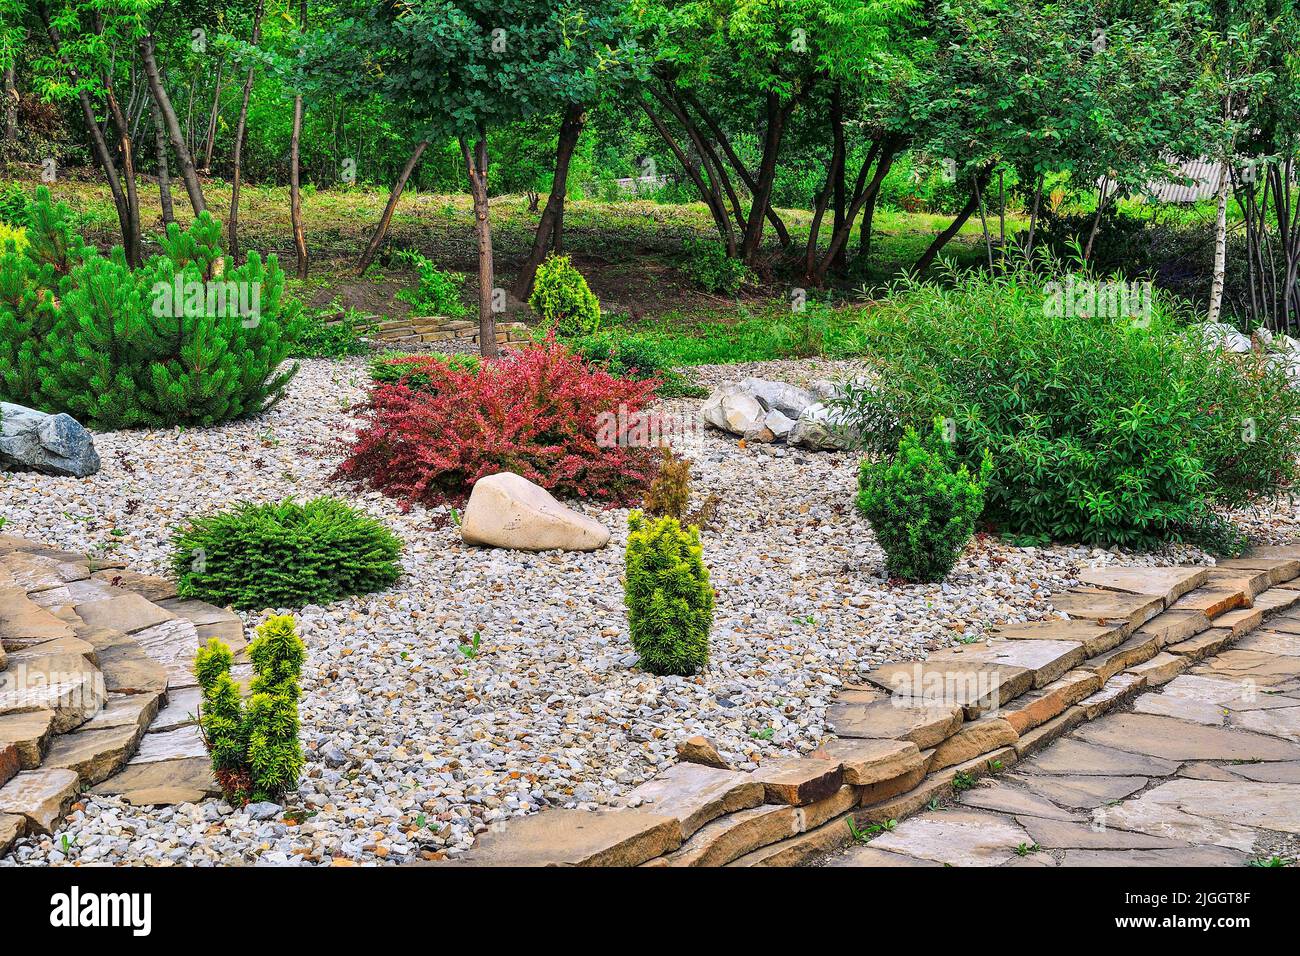 Corner of ornamental stony garden with various dwarf coniferous shrubs and deciduous bushes: yews, spruce and pine, barberry thunberg plant with red l Stock Photo